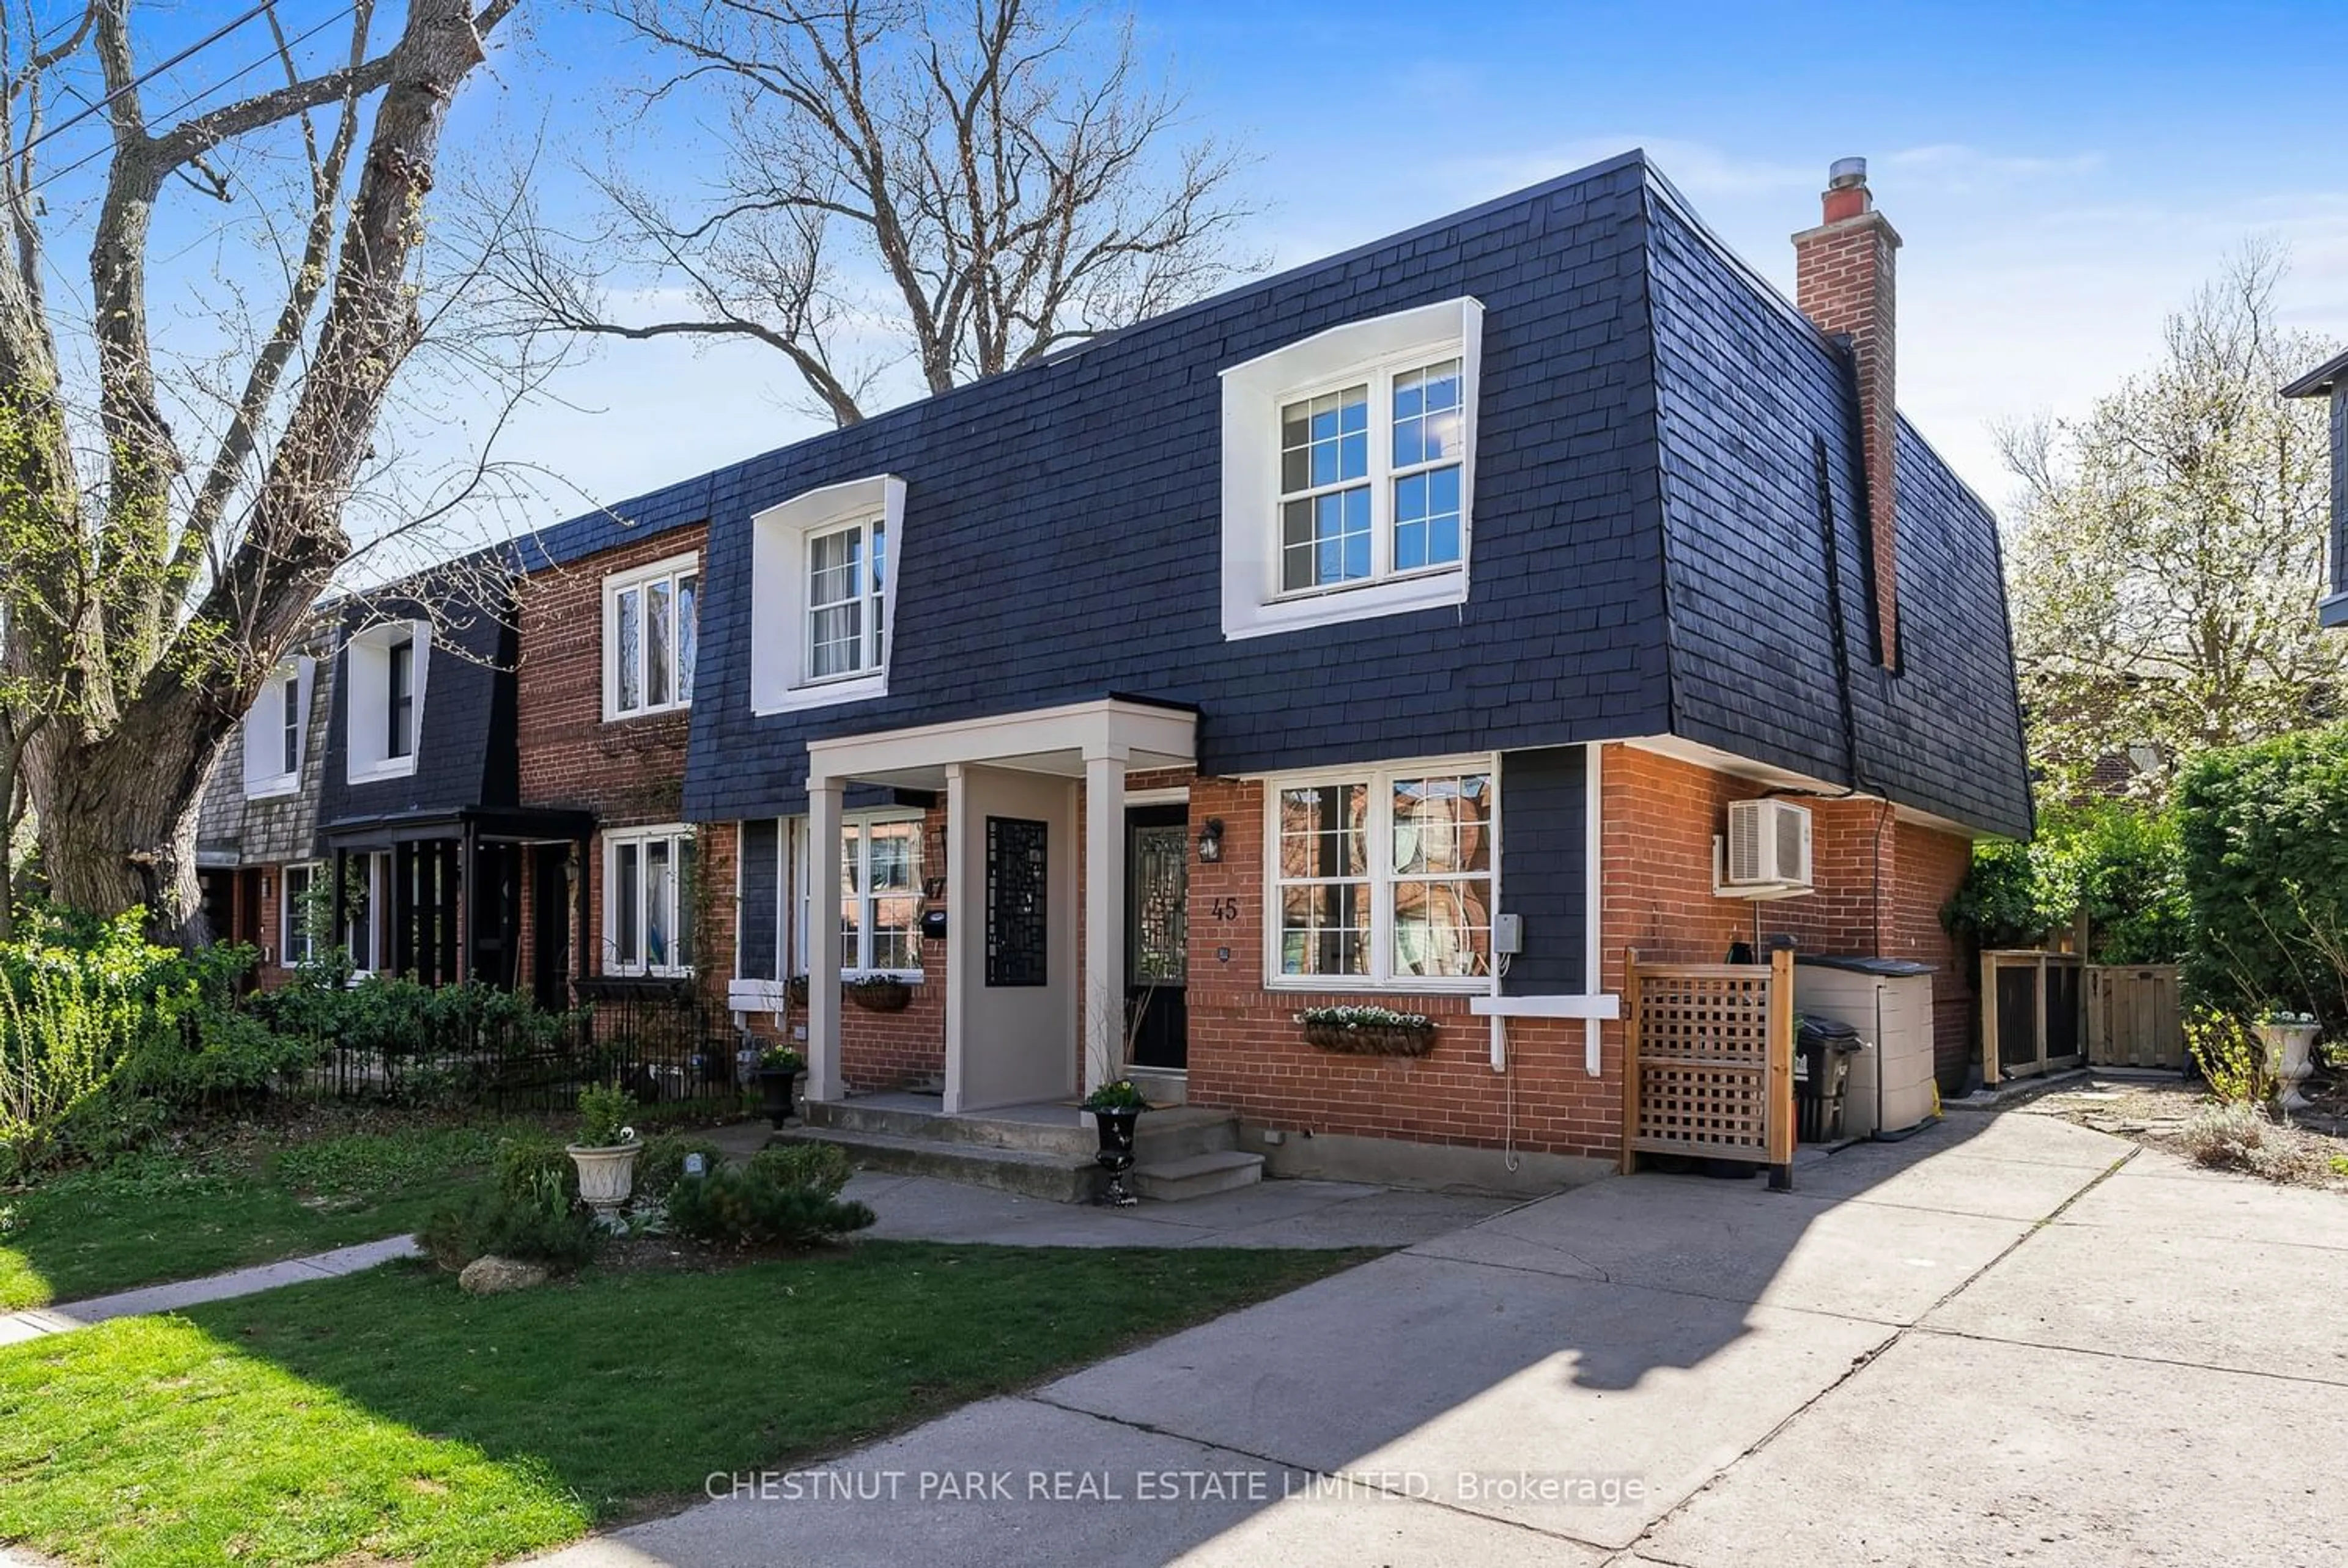 Home with brick exterior material for 45 Summerhill Gdns, Toronto Ontario M4T 1B4